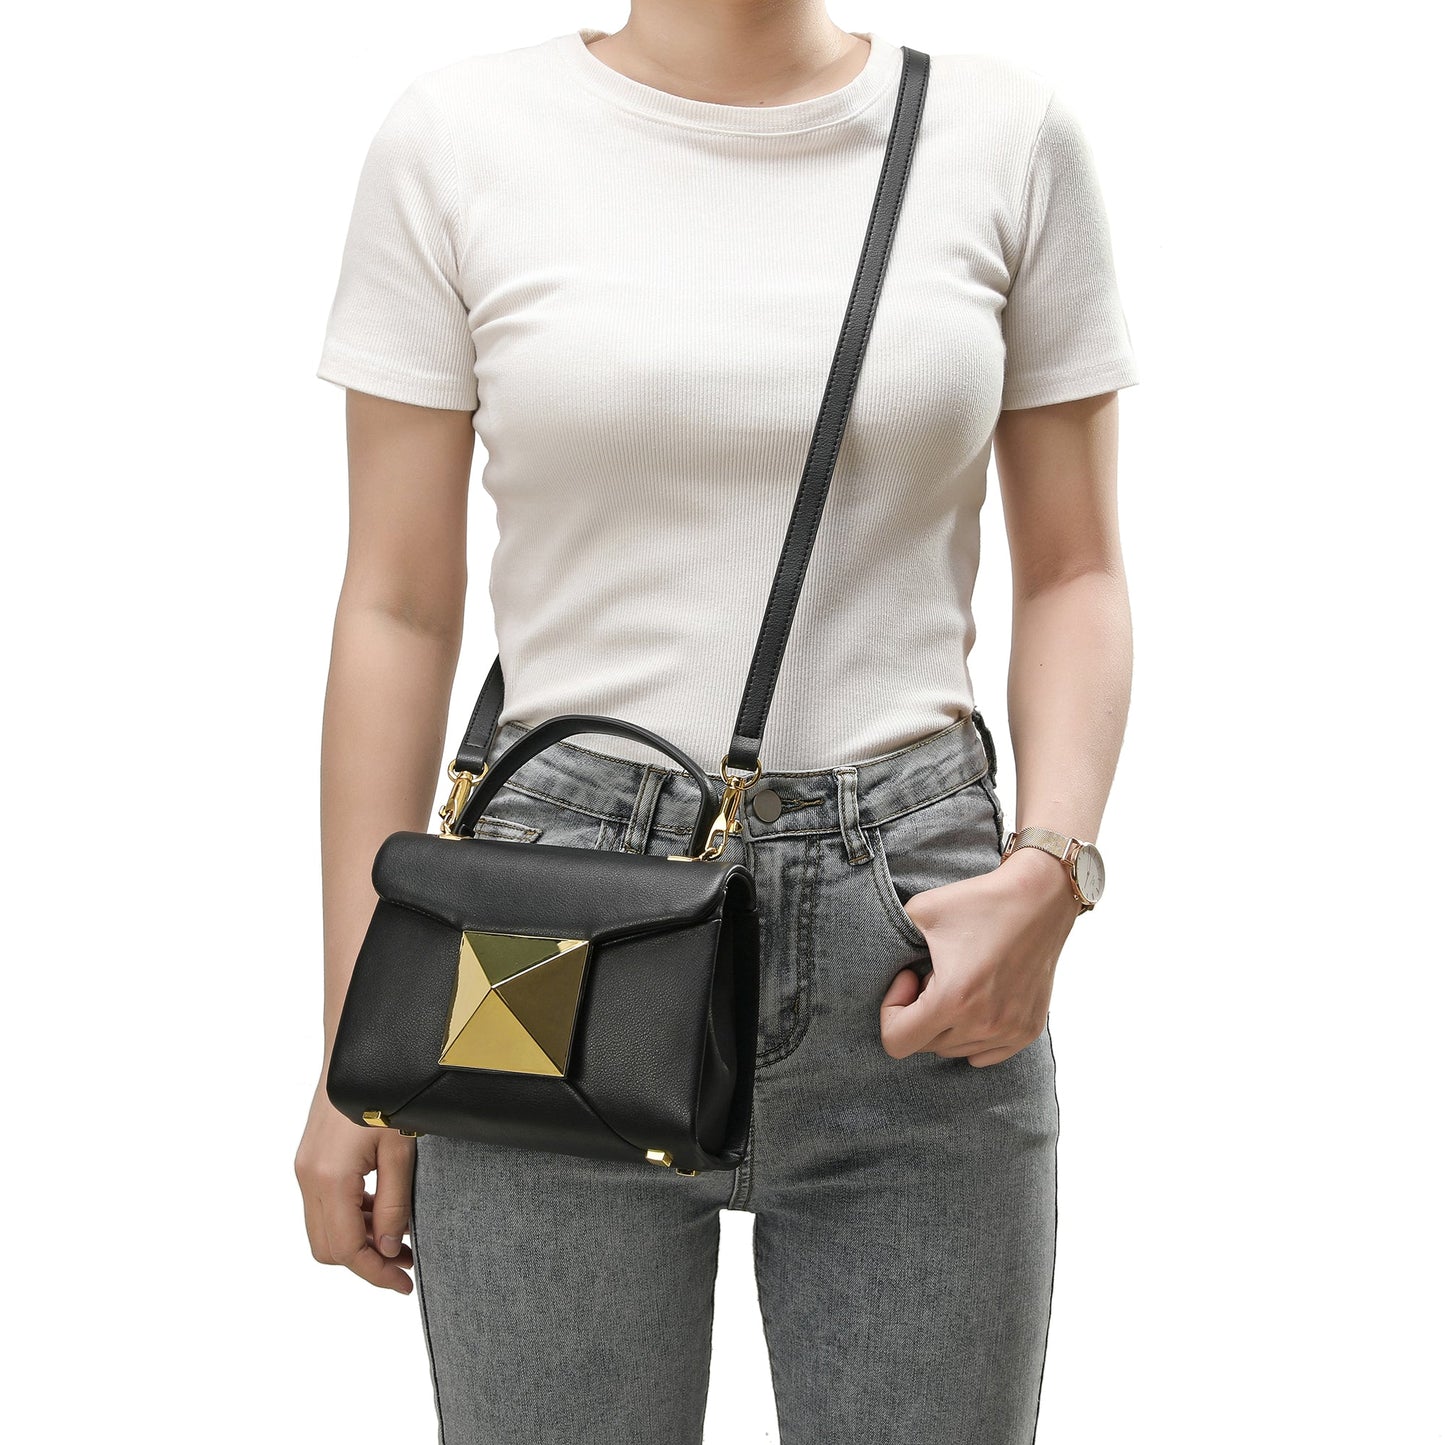 Full-Grain Soft Leather Top-Handle